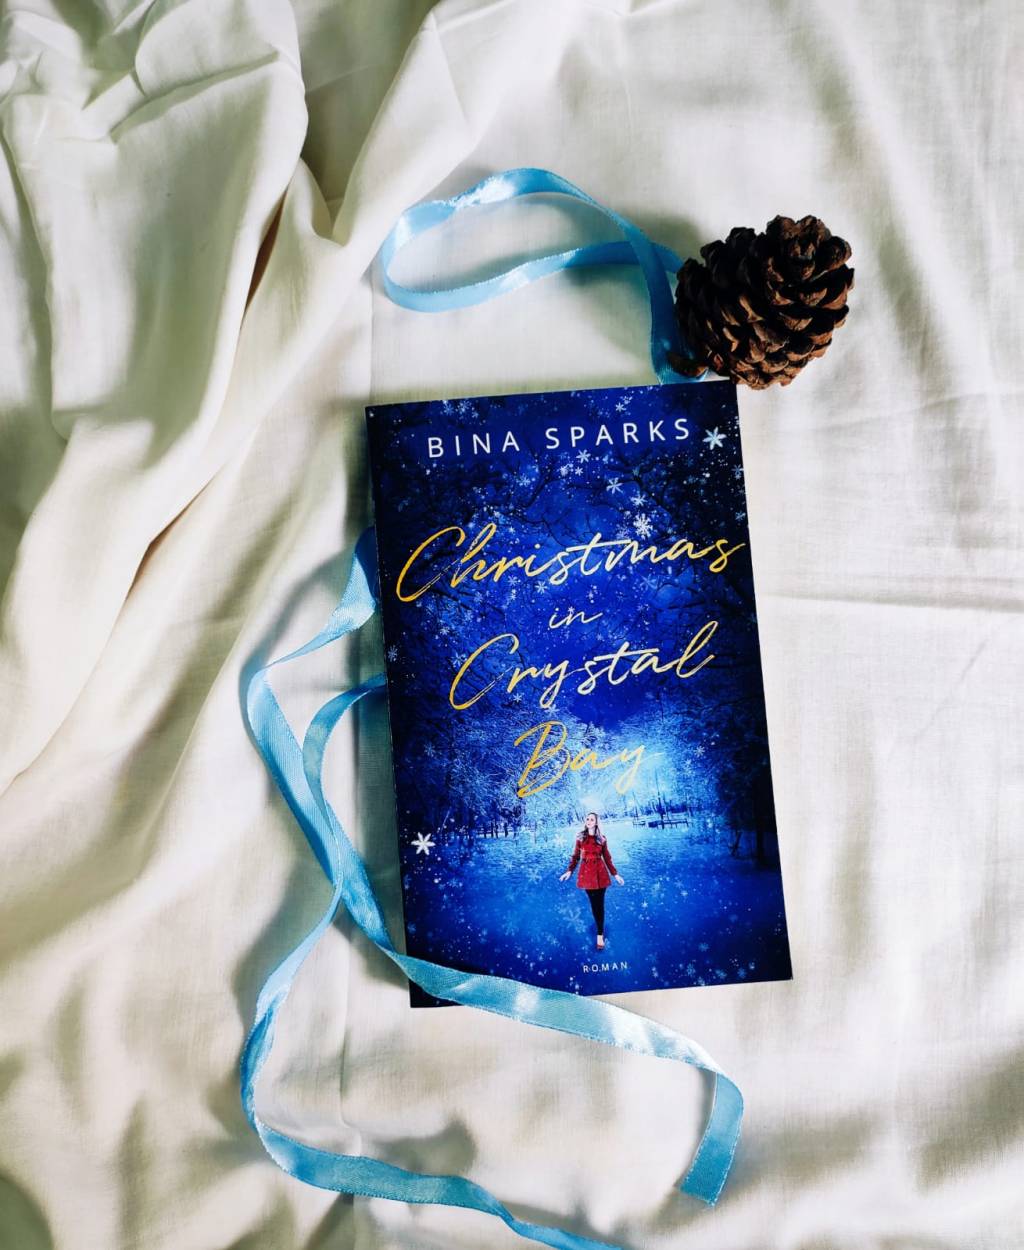 Do you like watching Christmas movies or reading Christmas novel? No less than a movie it’s a joyful book: Christmas in Crystal Bay by Bina Sparks – Book Review